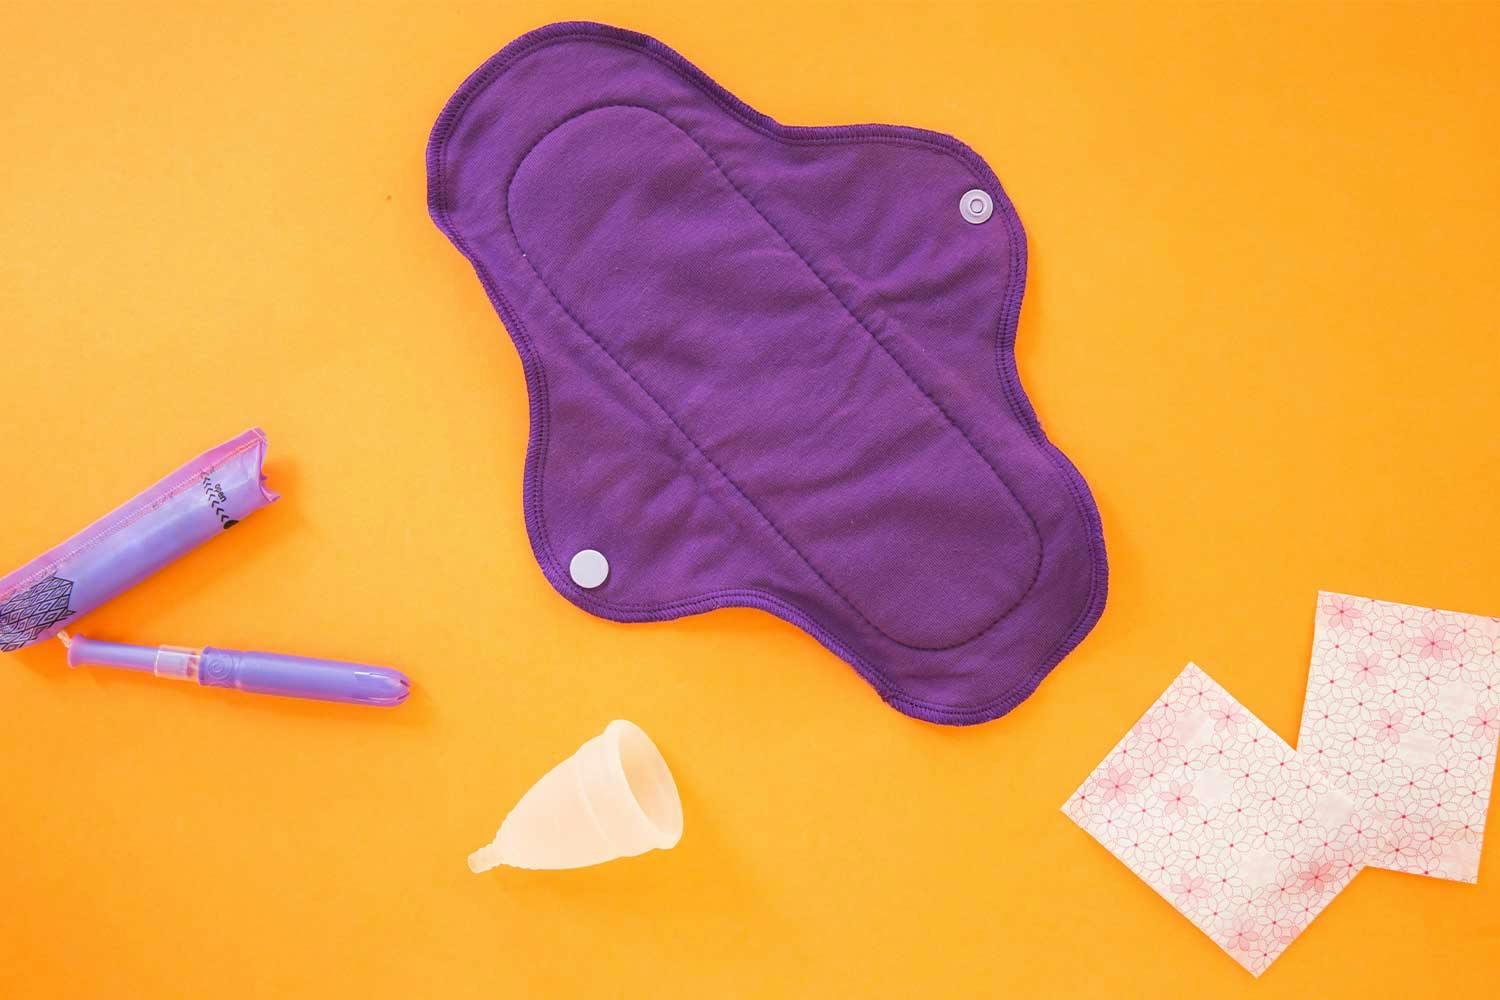 A purple fabric reusable menstrual pad, tampon, clear plastic menstrual cup, and disposable pads on an orange background.